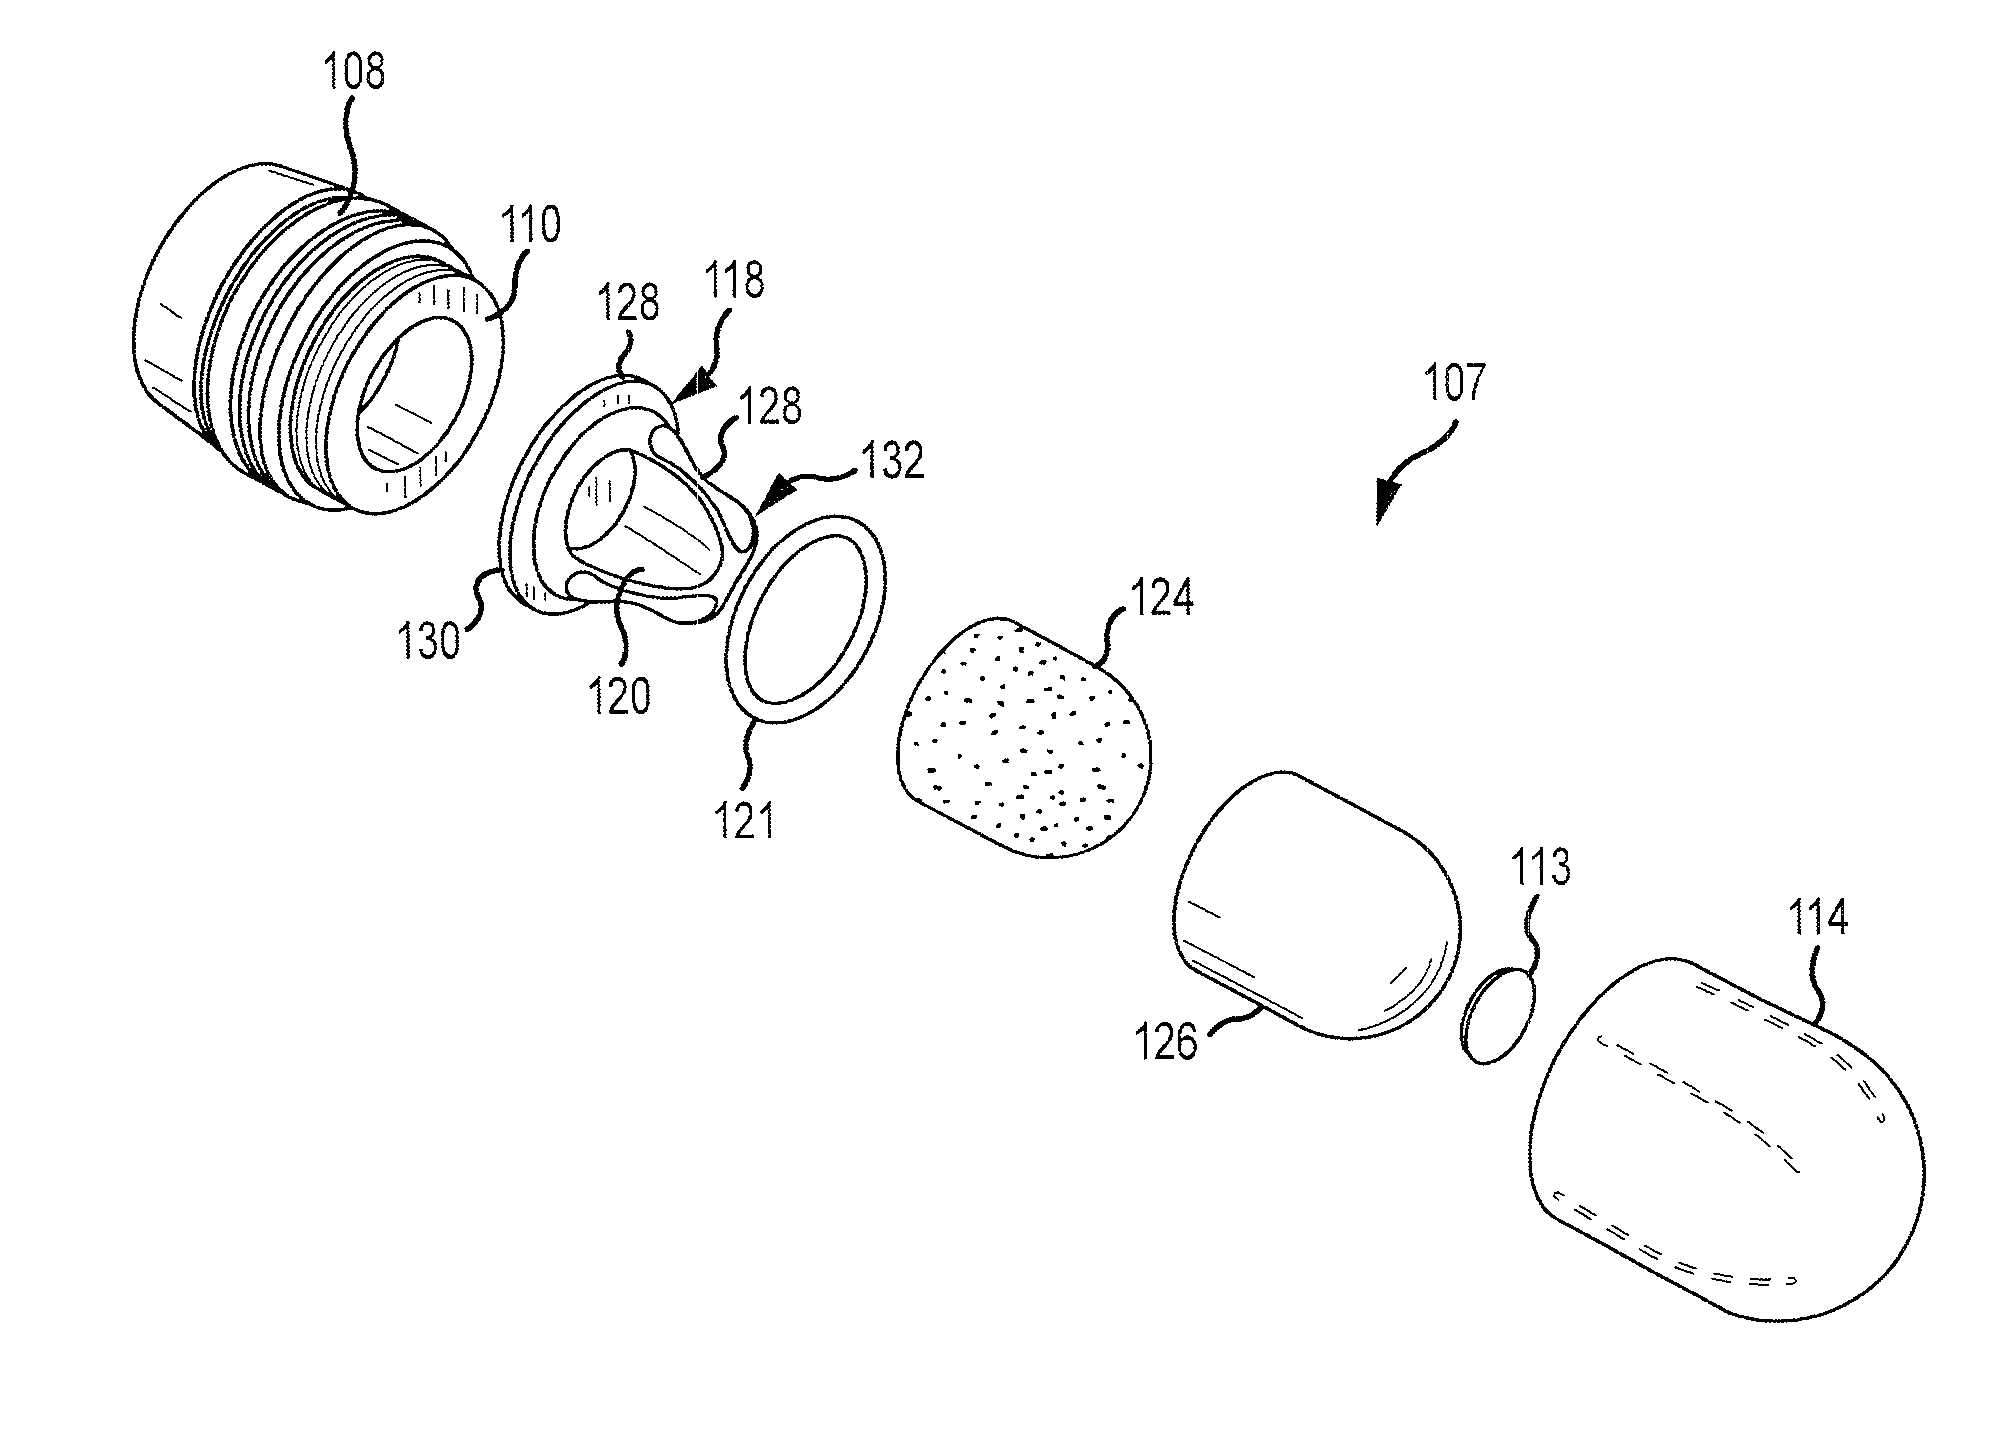 Non-dud signature training cartridge and projectile